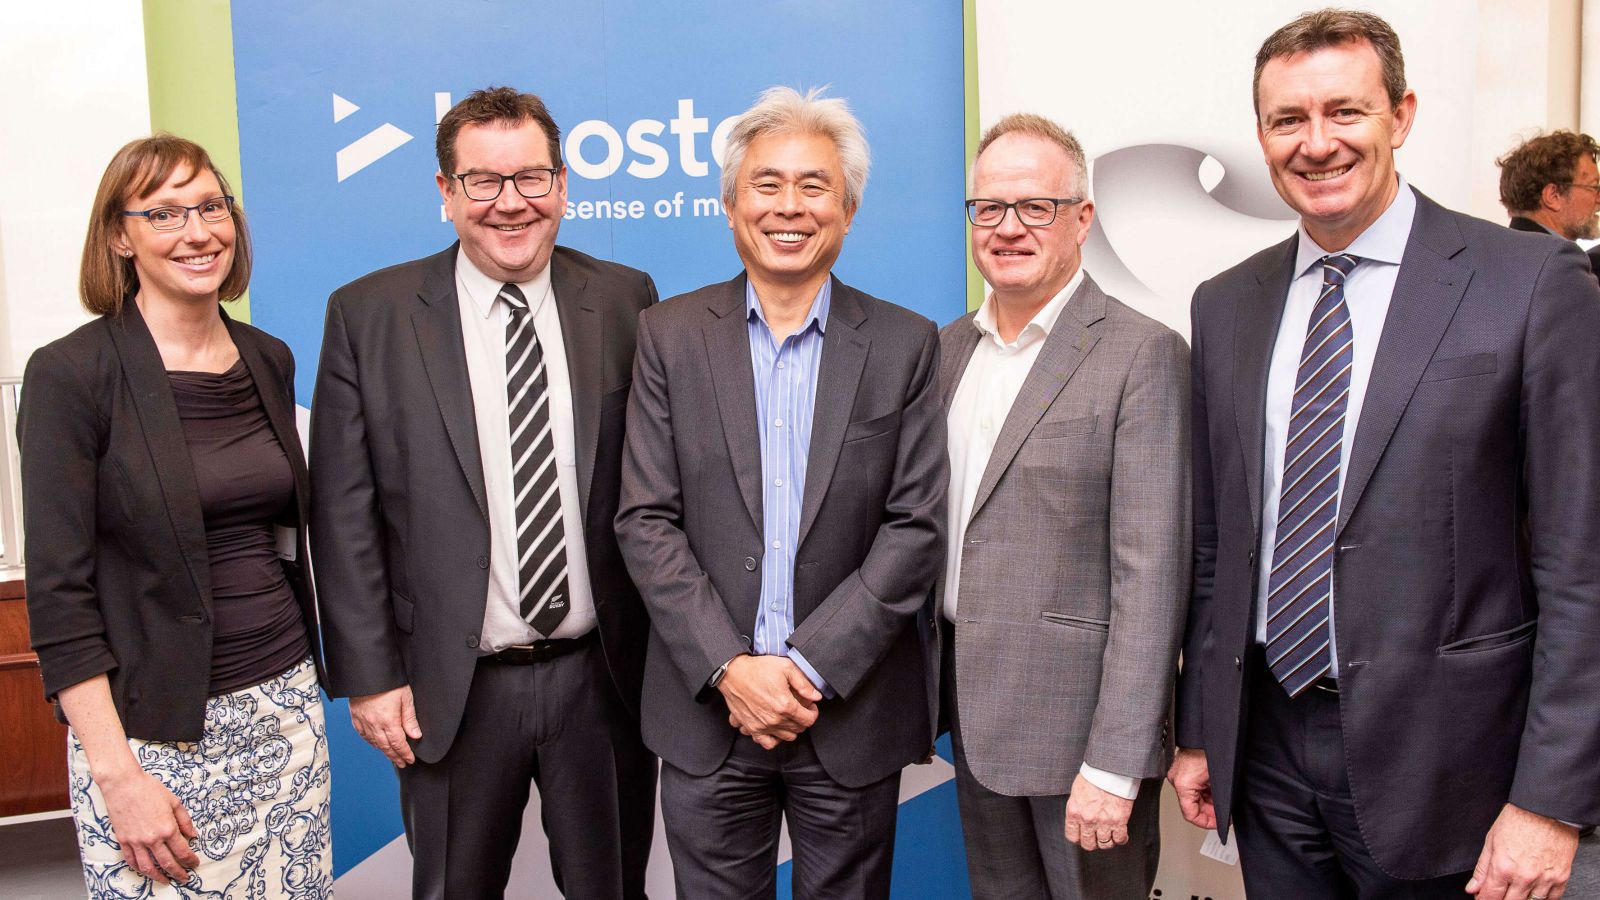 Left to right, Viclink Chief Executive Officer Dr Anne Barnett, Minister of Finance the Hon. Grant Robertson; Booster Managing Director Allan Yeo, Booster Executive Chairman Paul Foley and Victoria University of Wellington Chancellor Neil Paviour-Smith.